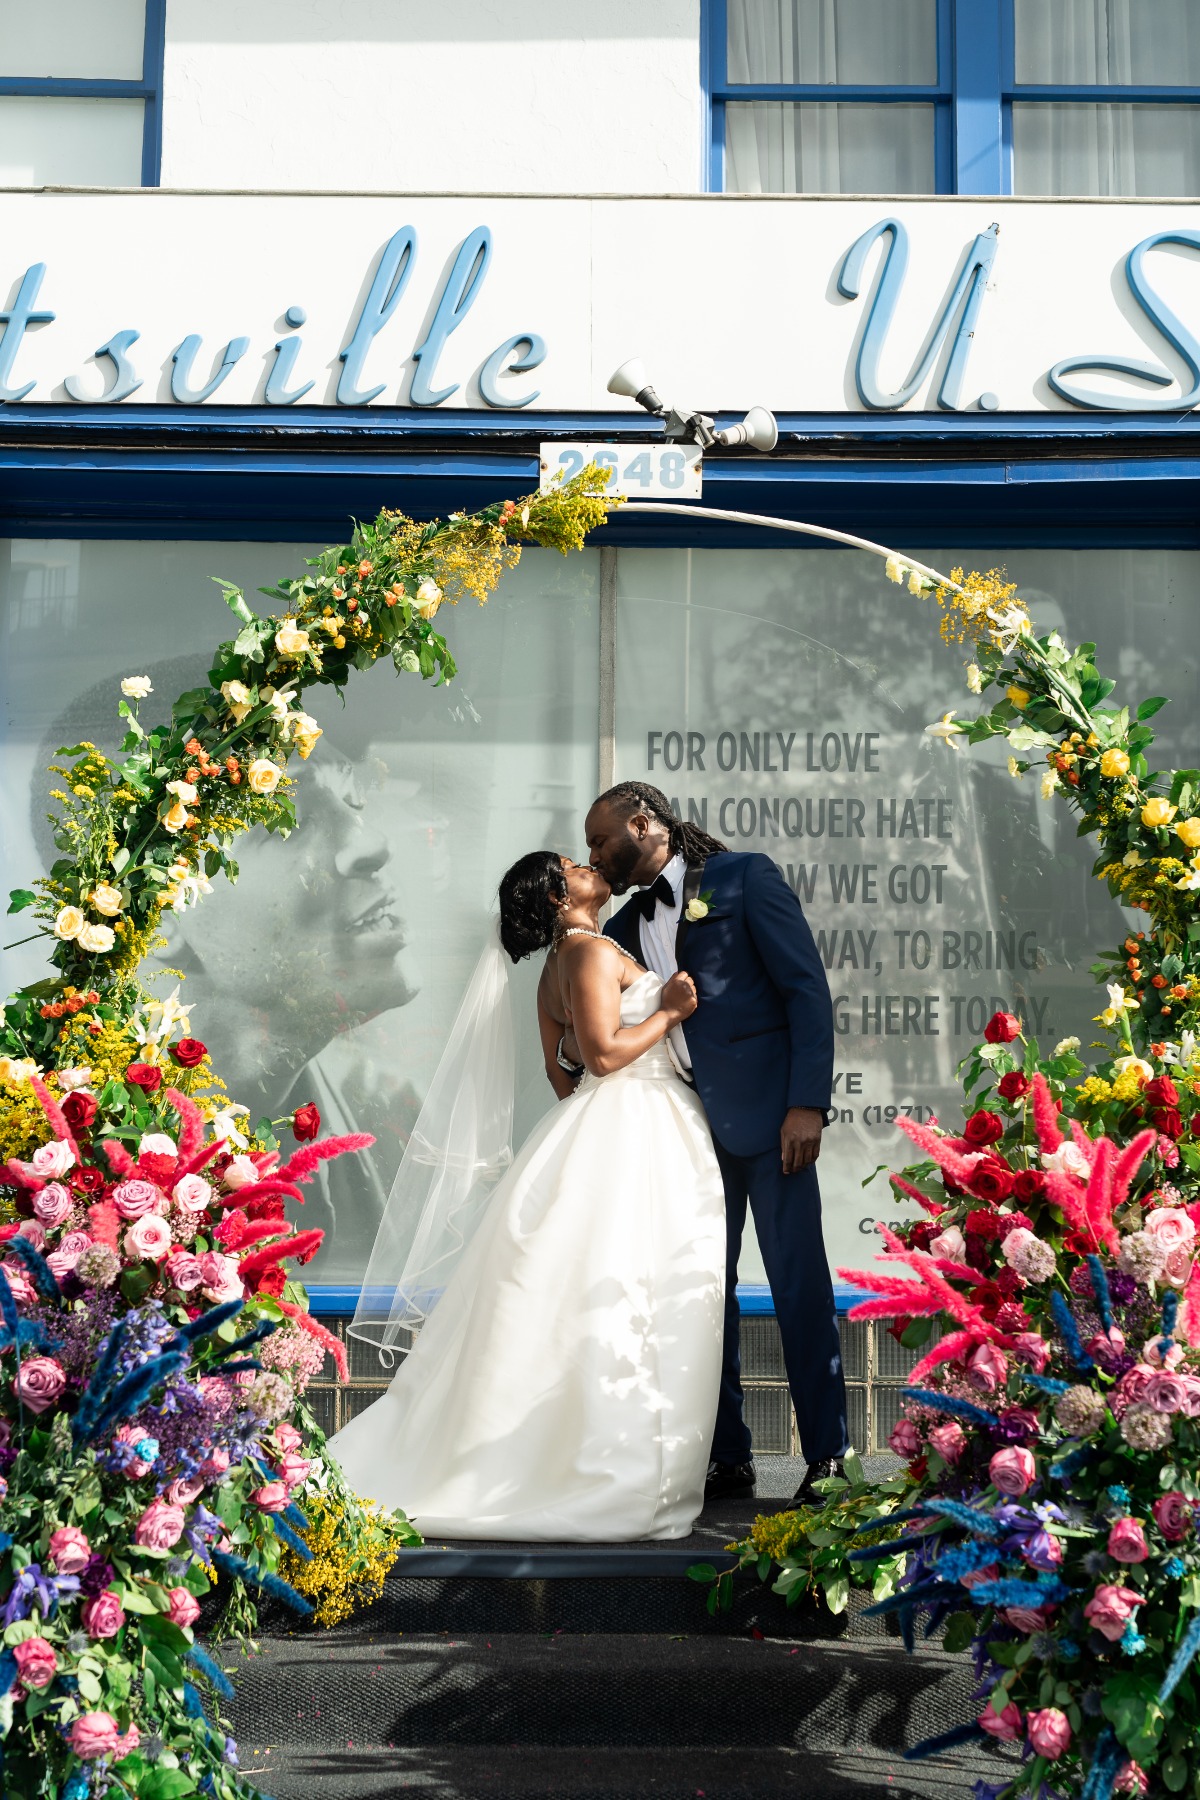 Celebrating Juneteenth And Black Love With This Joyous Motown-Inspired Shoot In The Heart Of Detroit